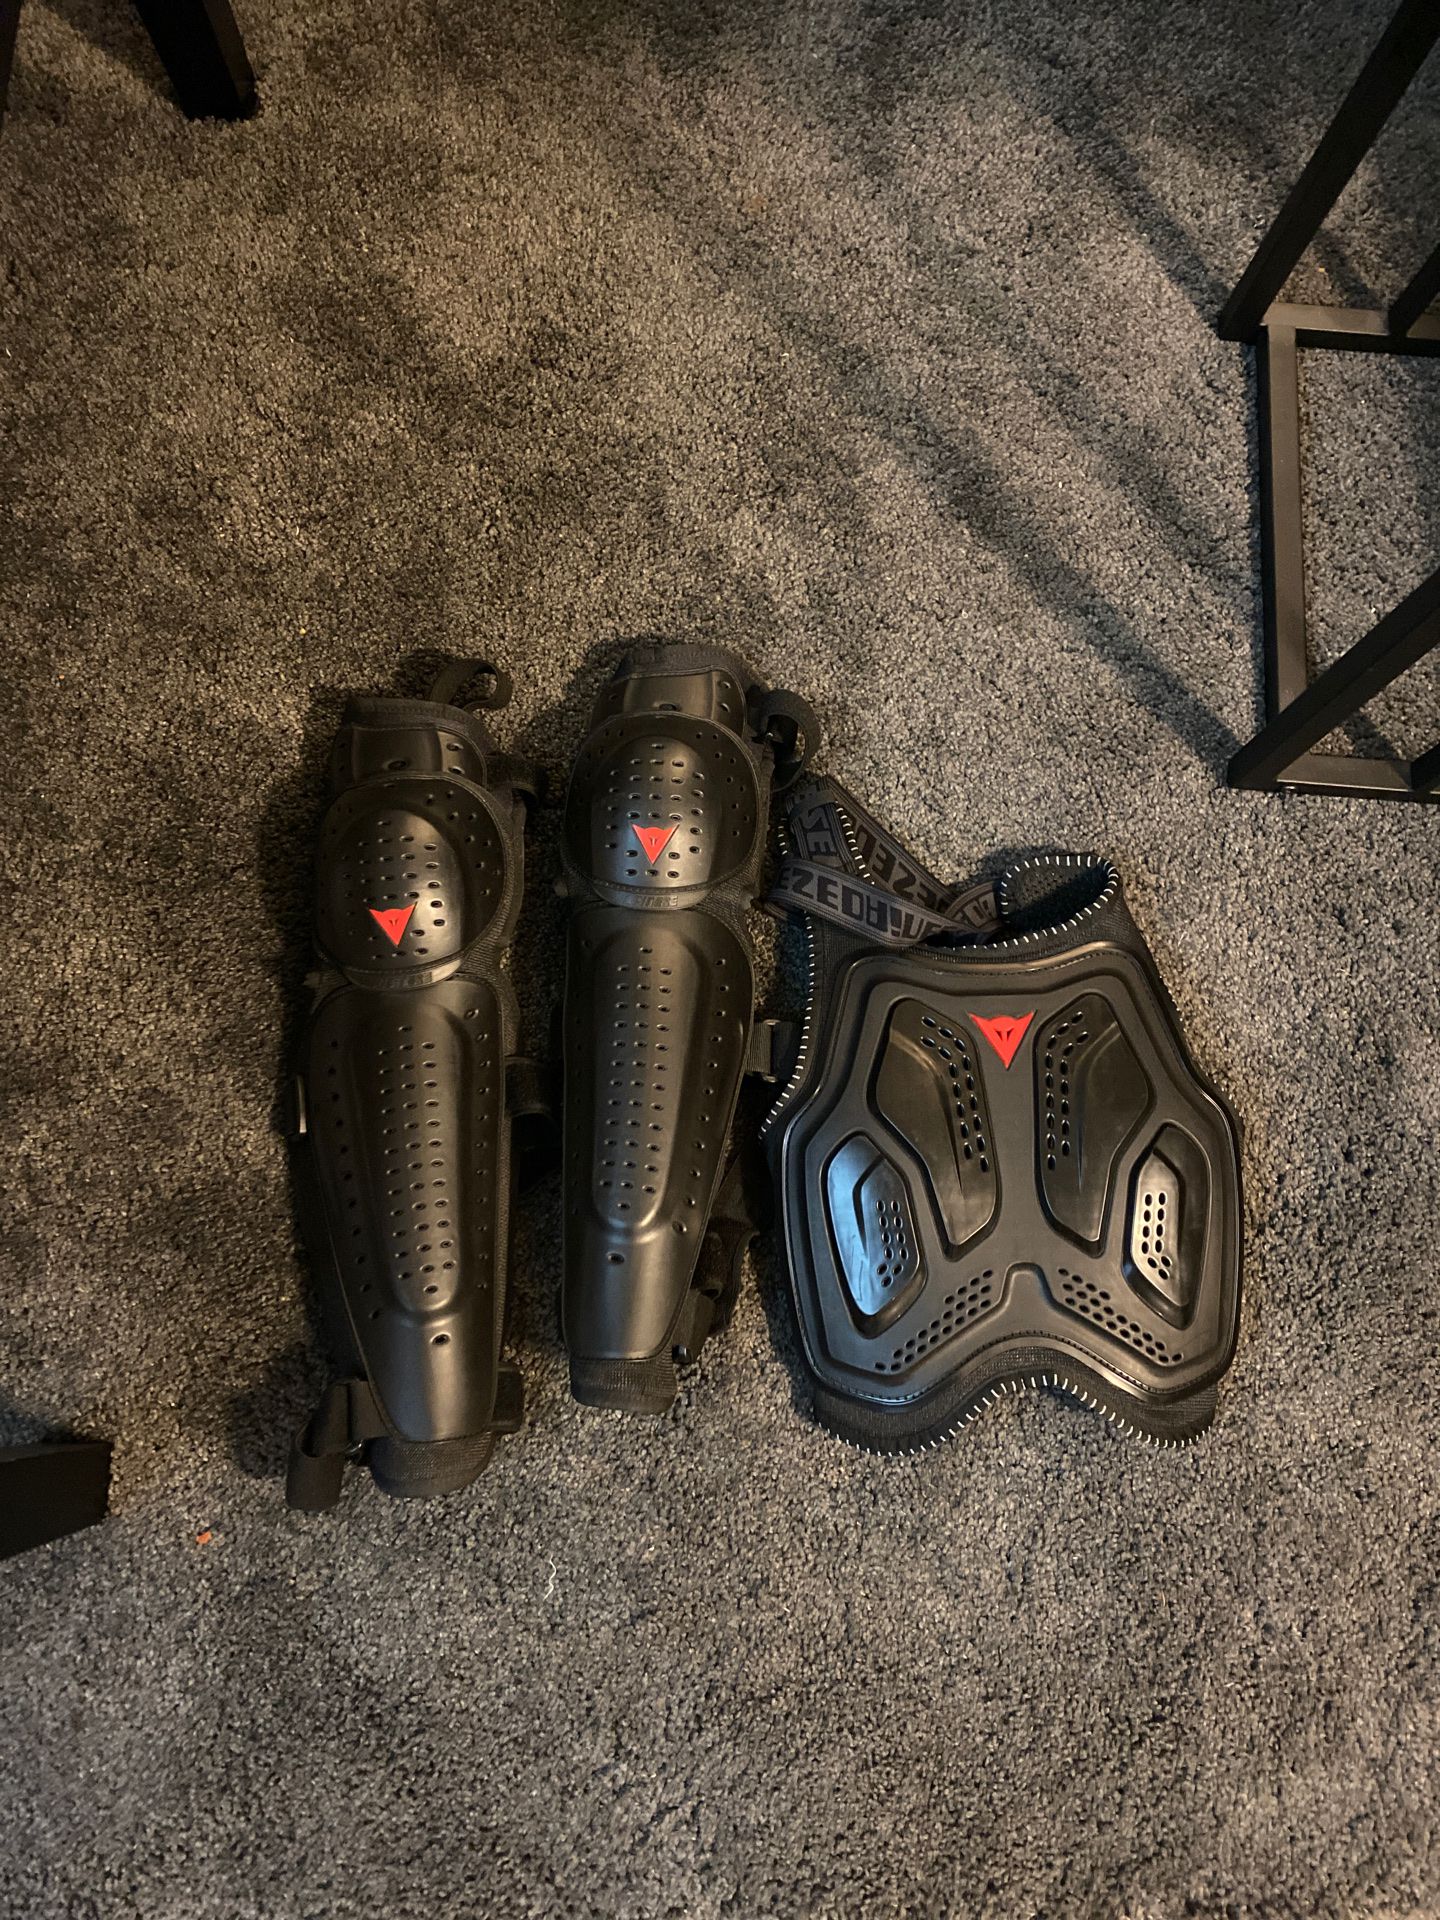 Dainese knee and shine guards and chest plate protector motorcycle gear